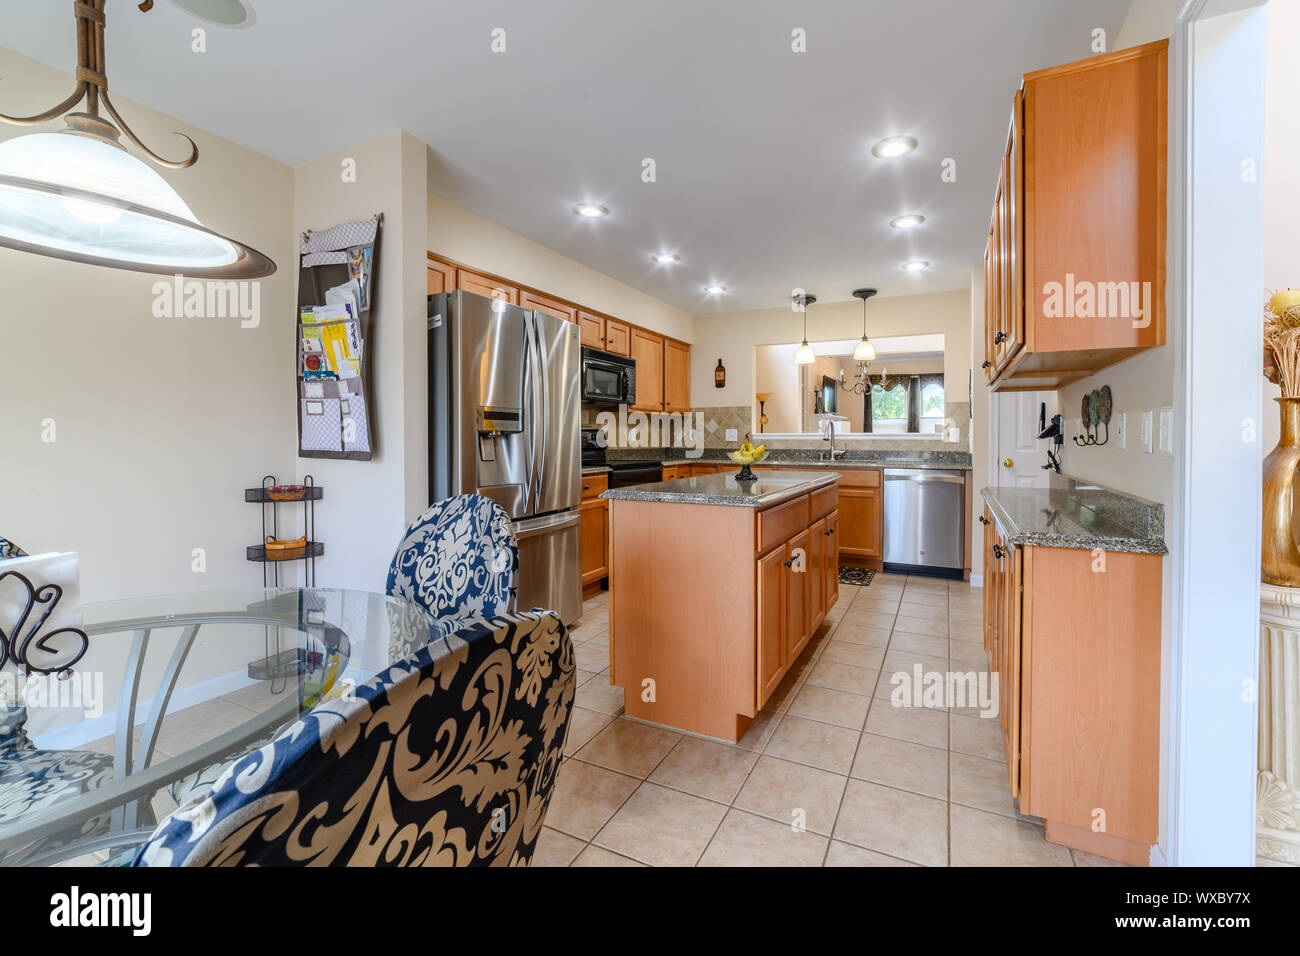 A large American kitchen in a suburban home. Stock Photo